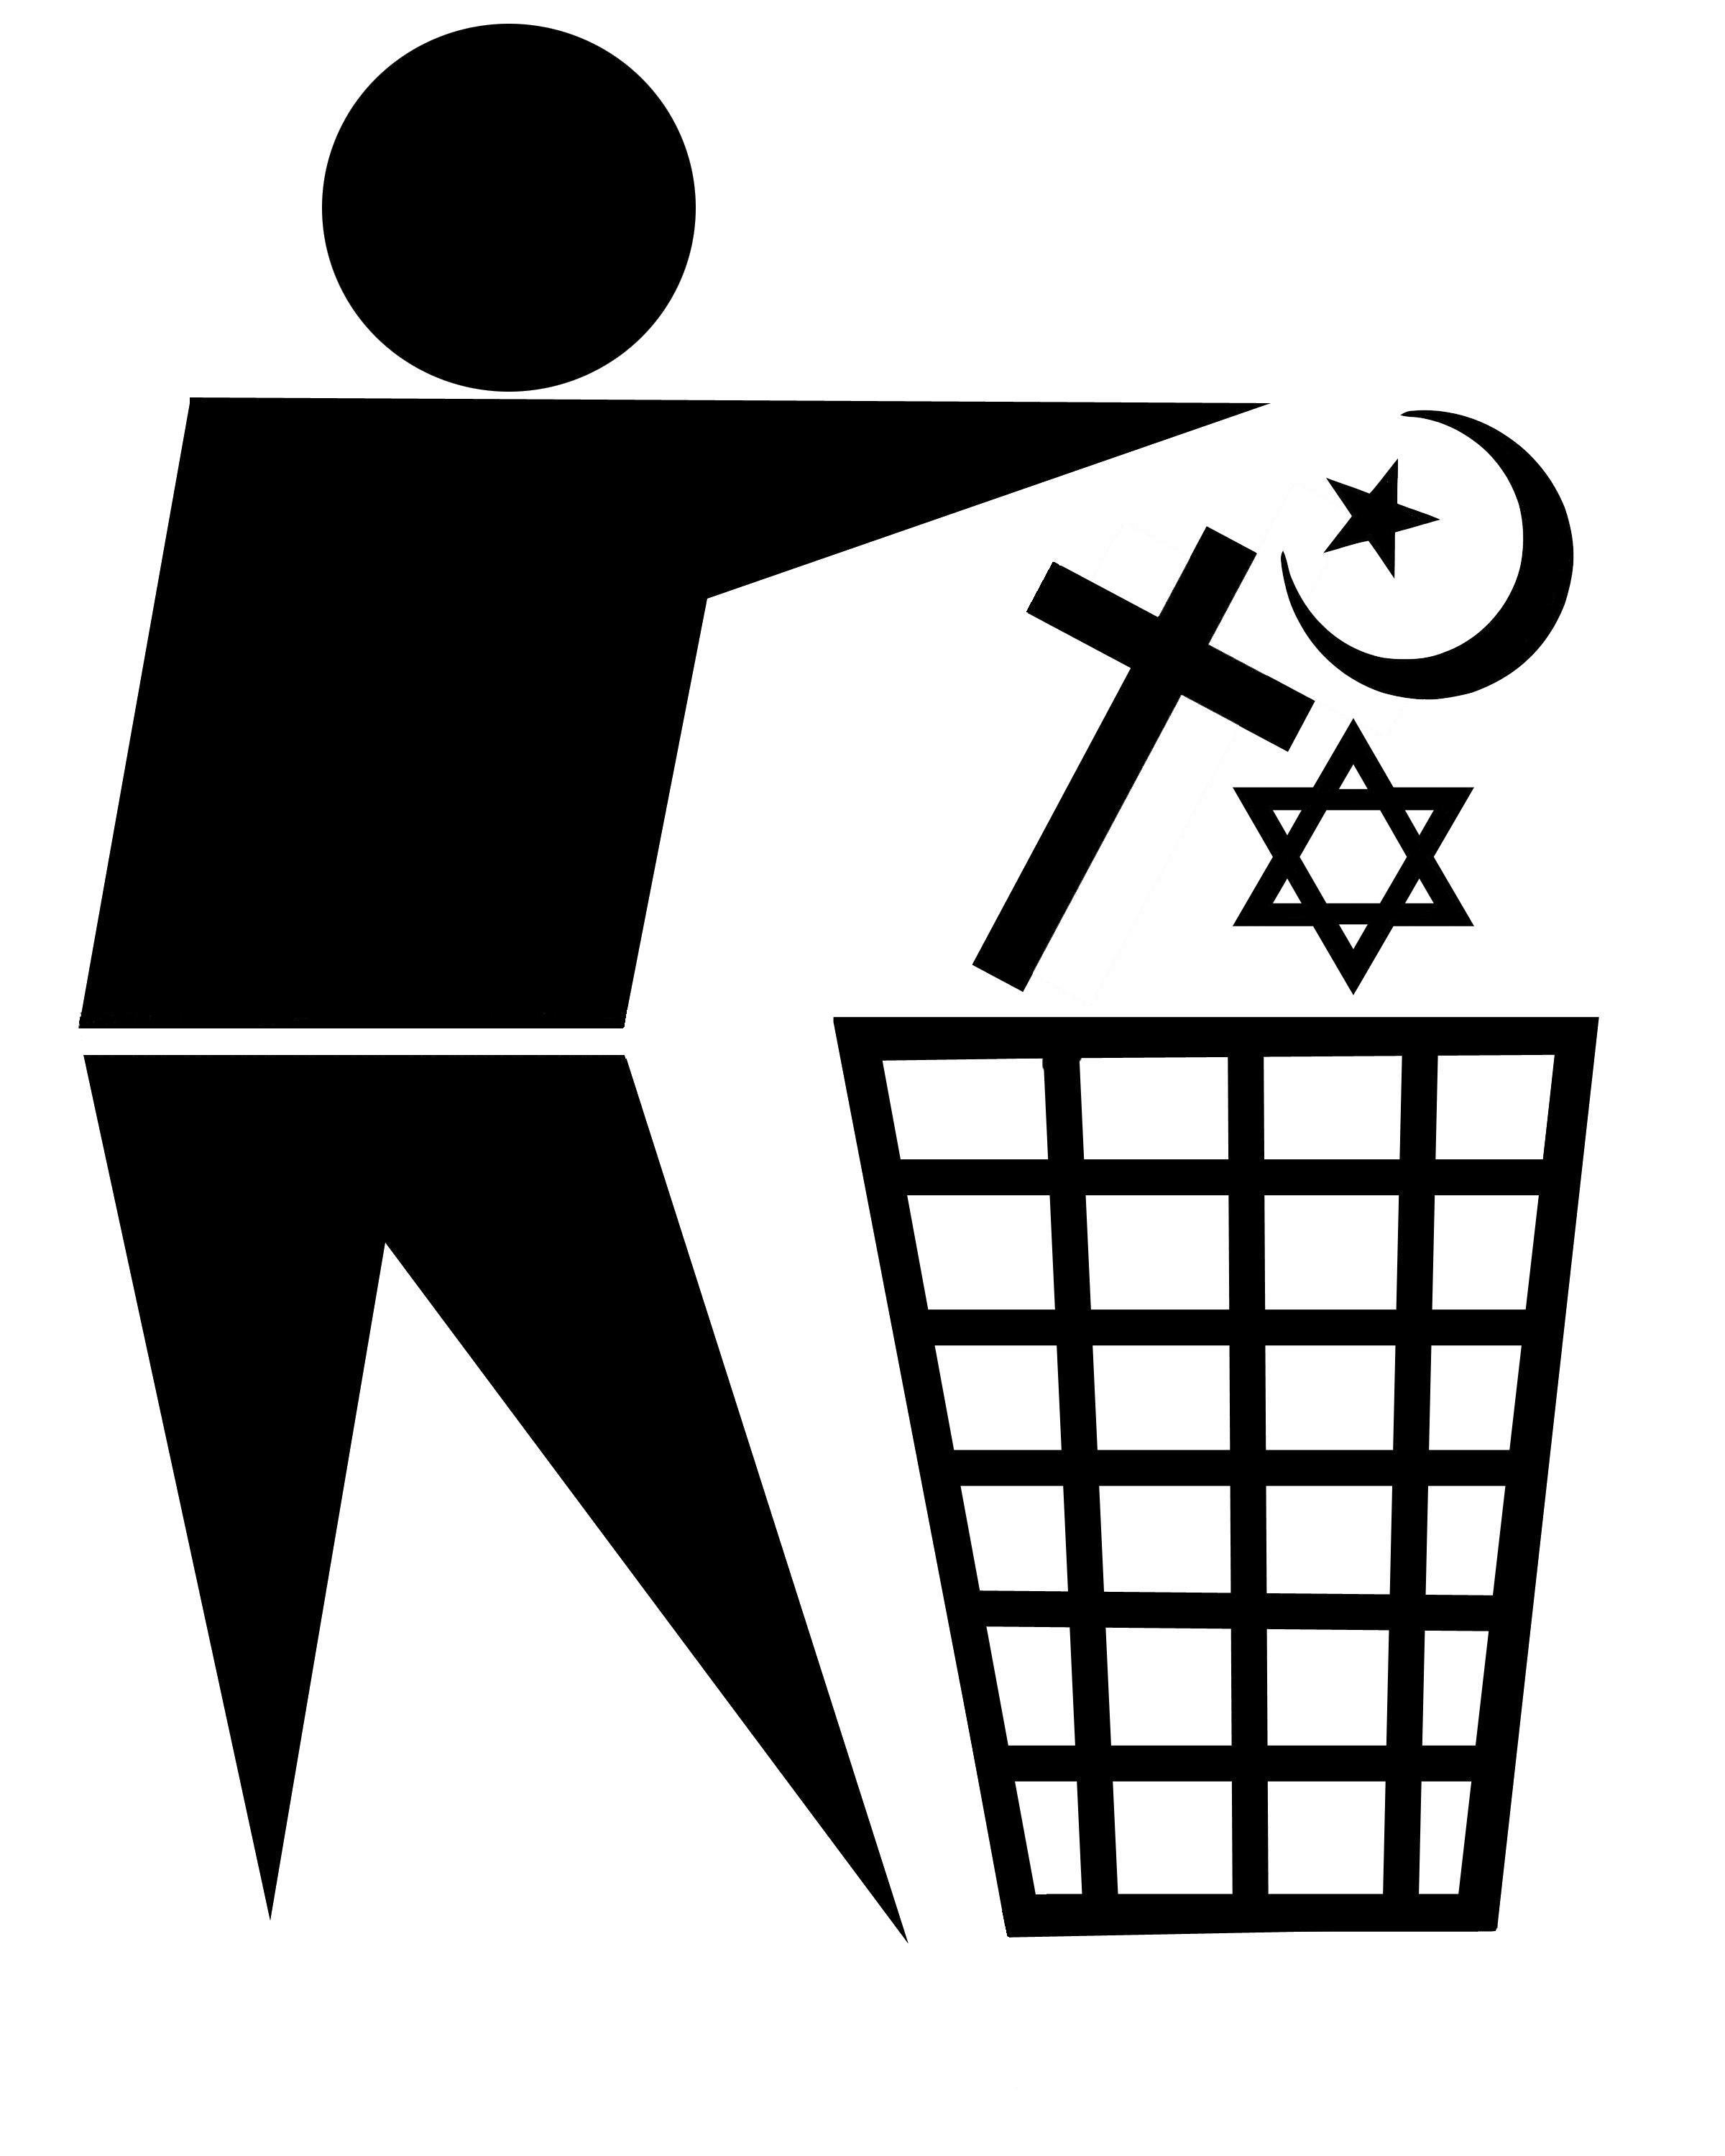 standard waste bin sign with religious symbols being discarded